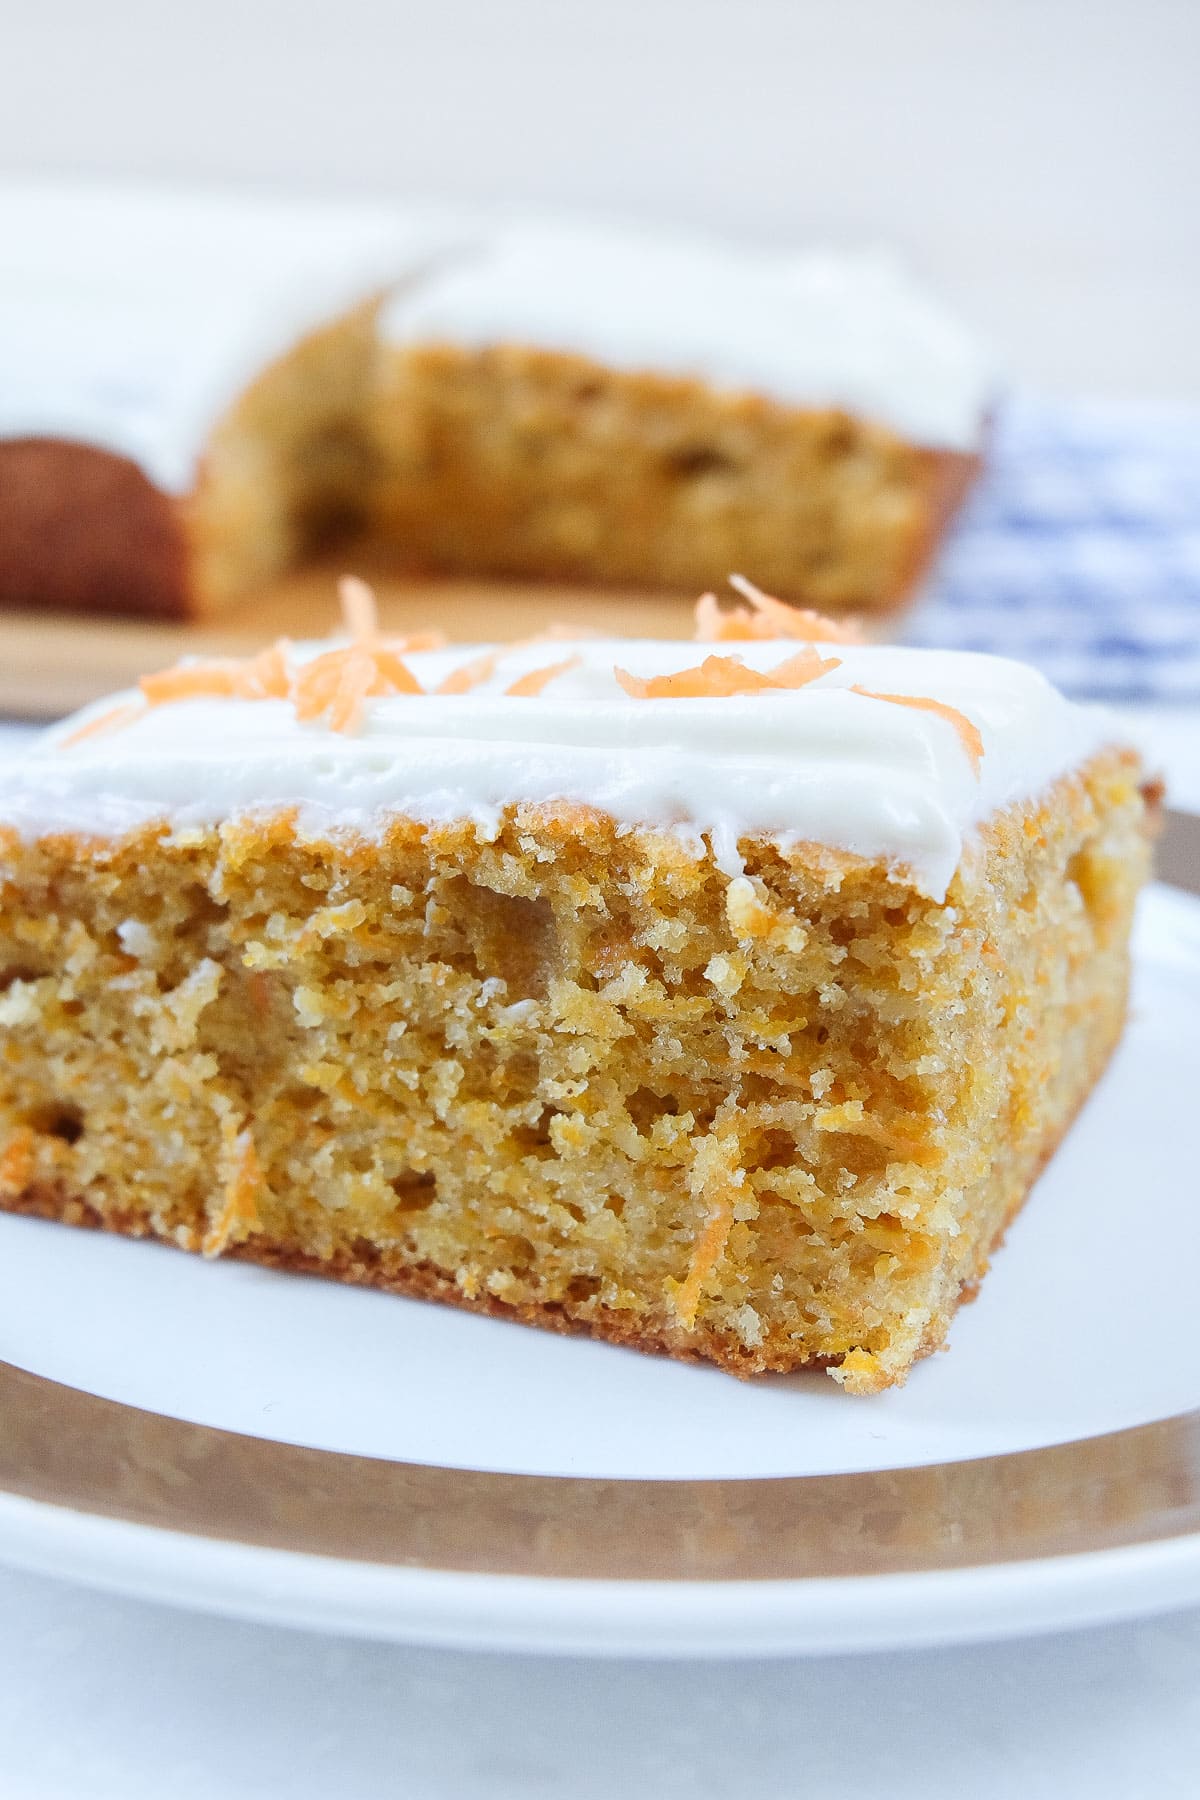 slice of carrot cake on plate with full cake behind